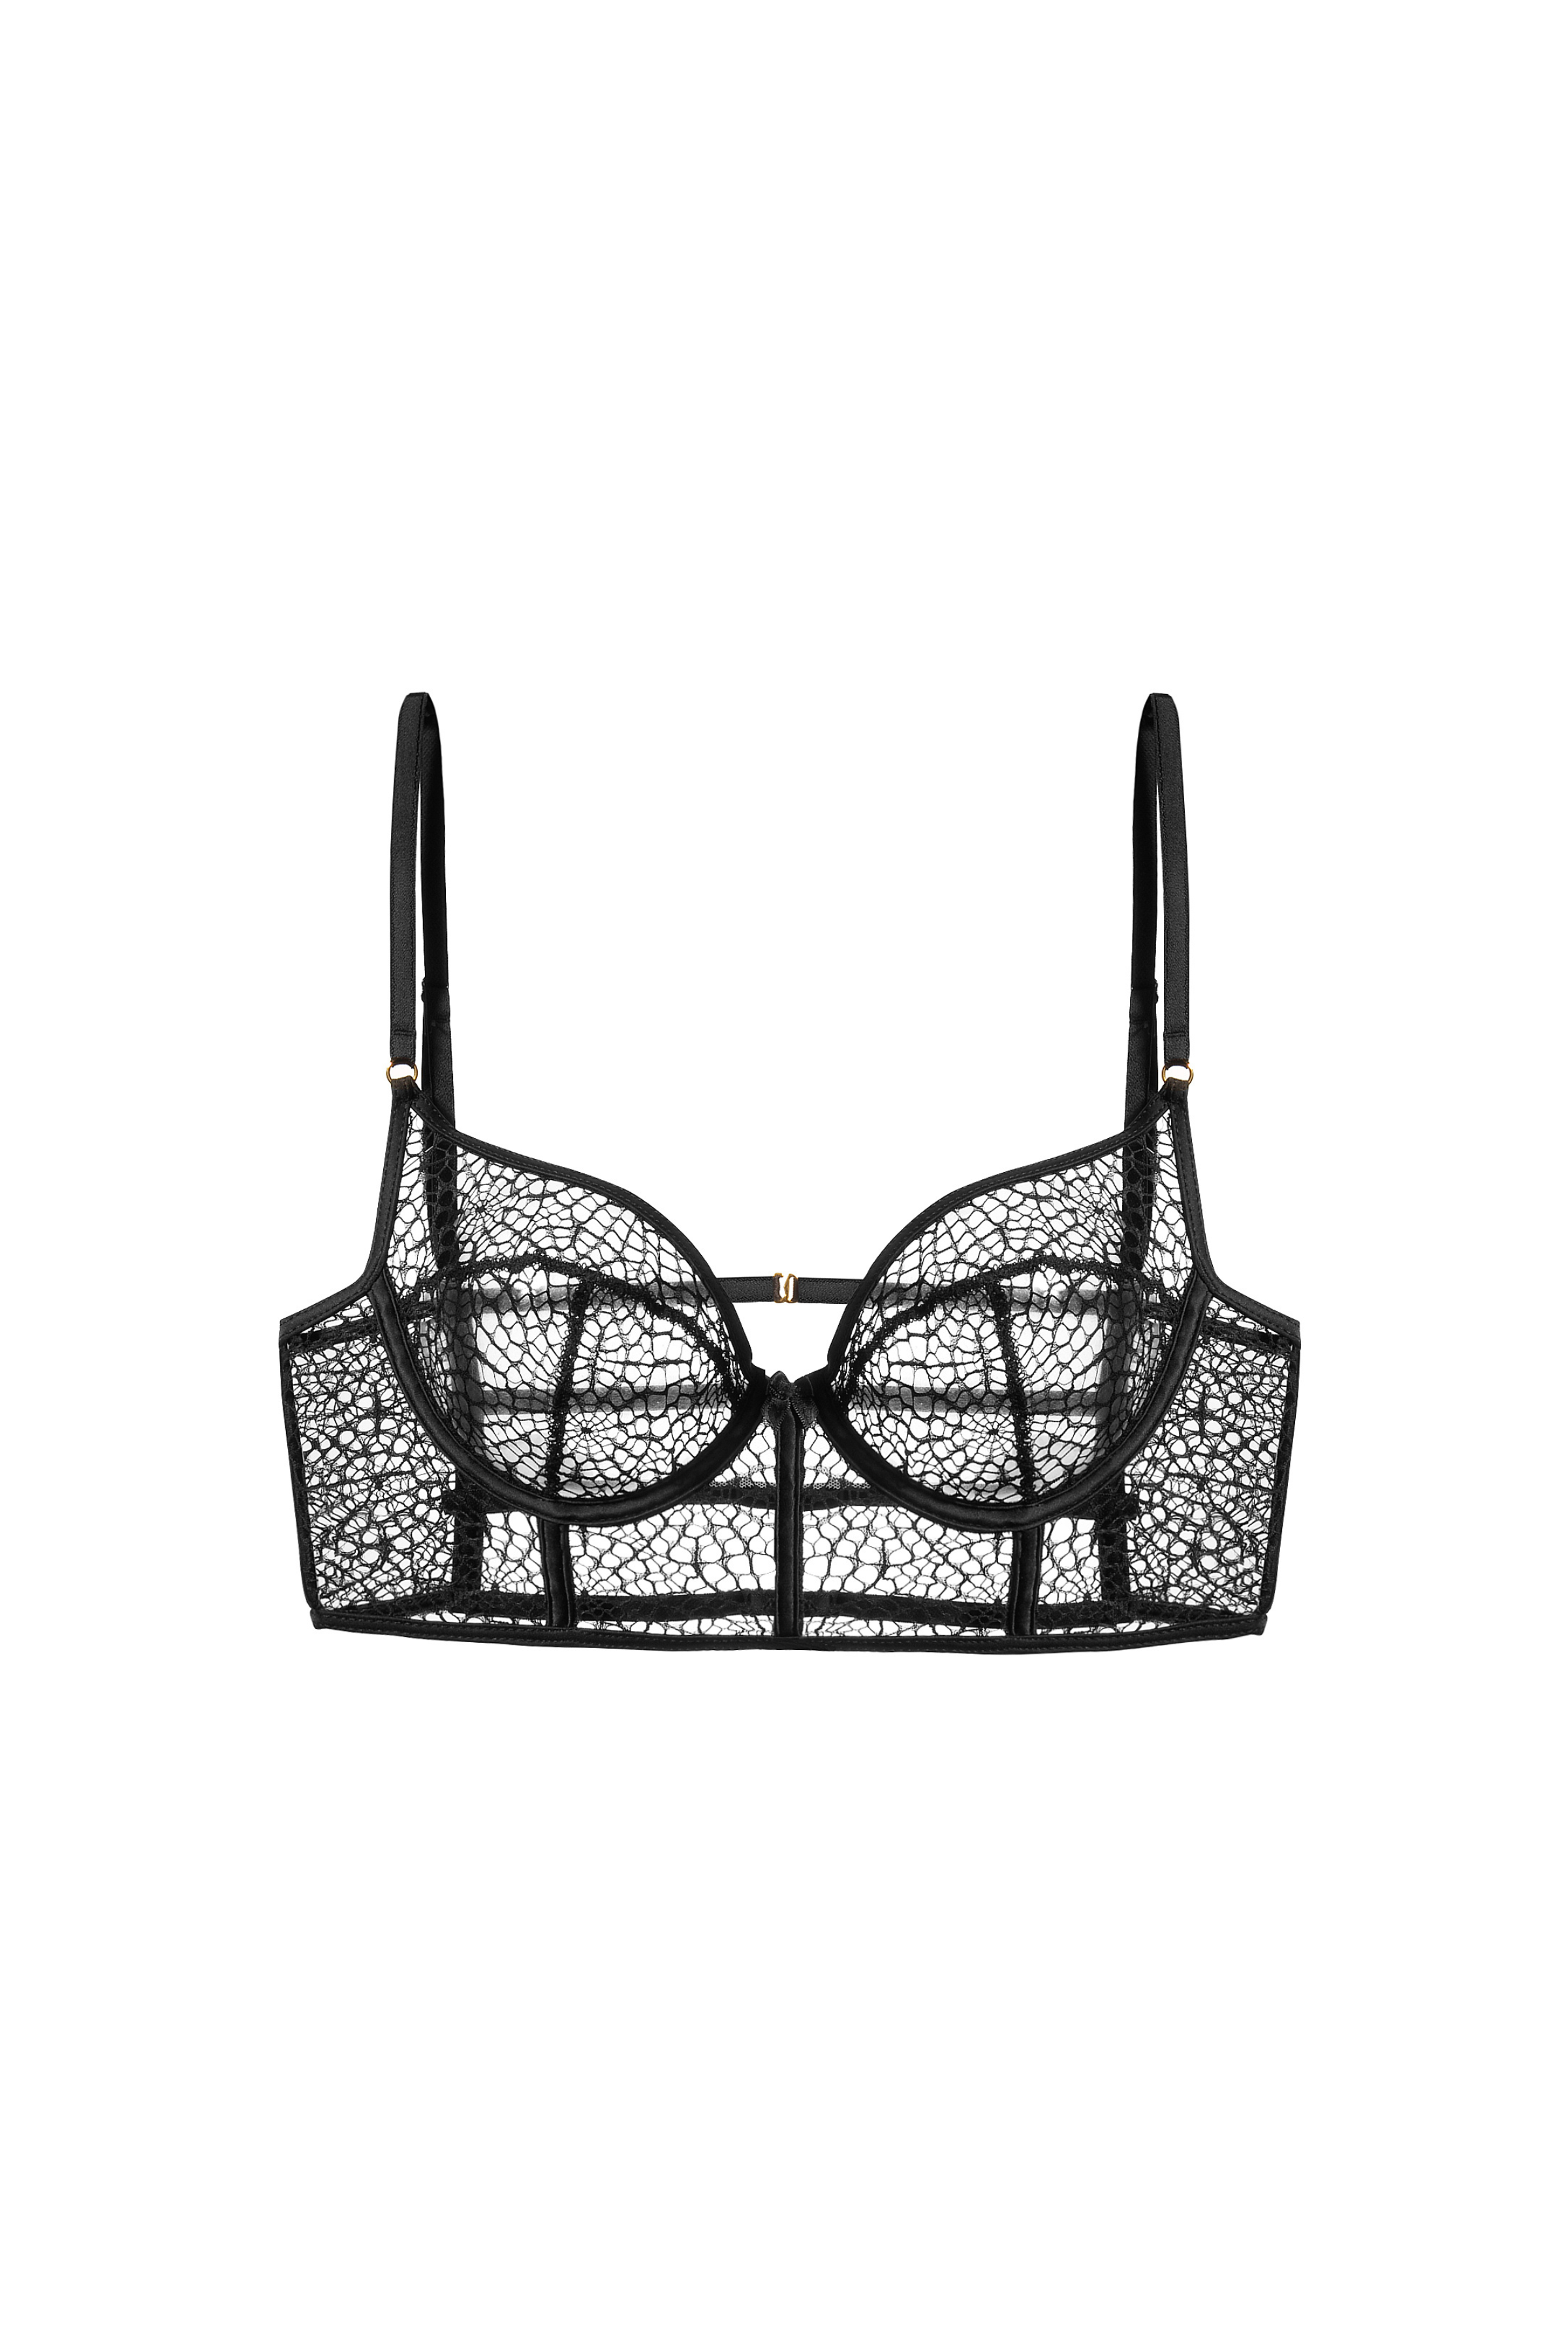 Laced It Up! Non-Slip Strapless Push Up Bra Tagged 38C/85C